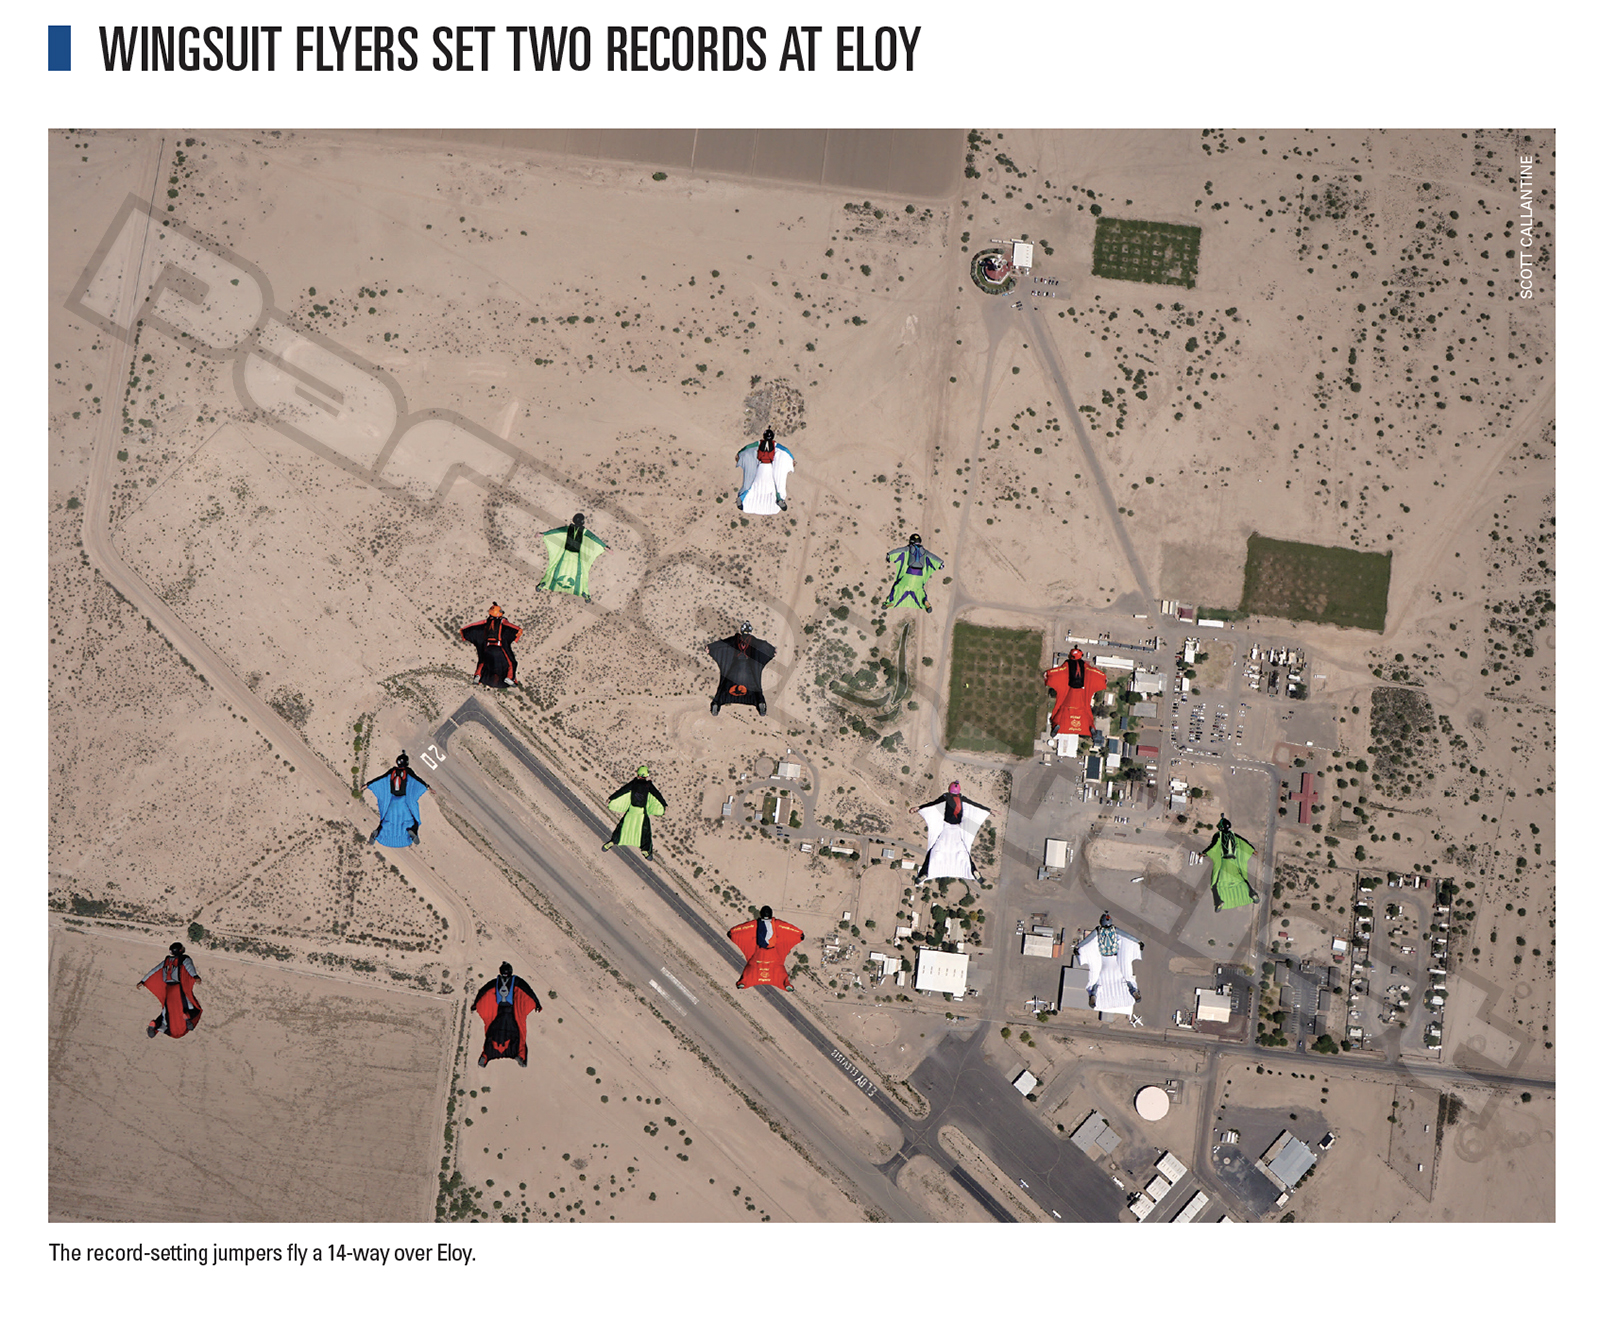 Wingsuit Flyers Set Two Records At Eloy